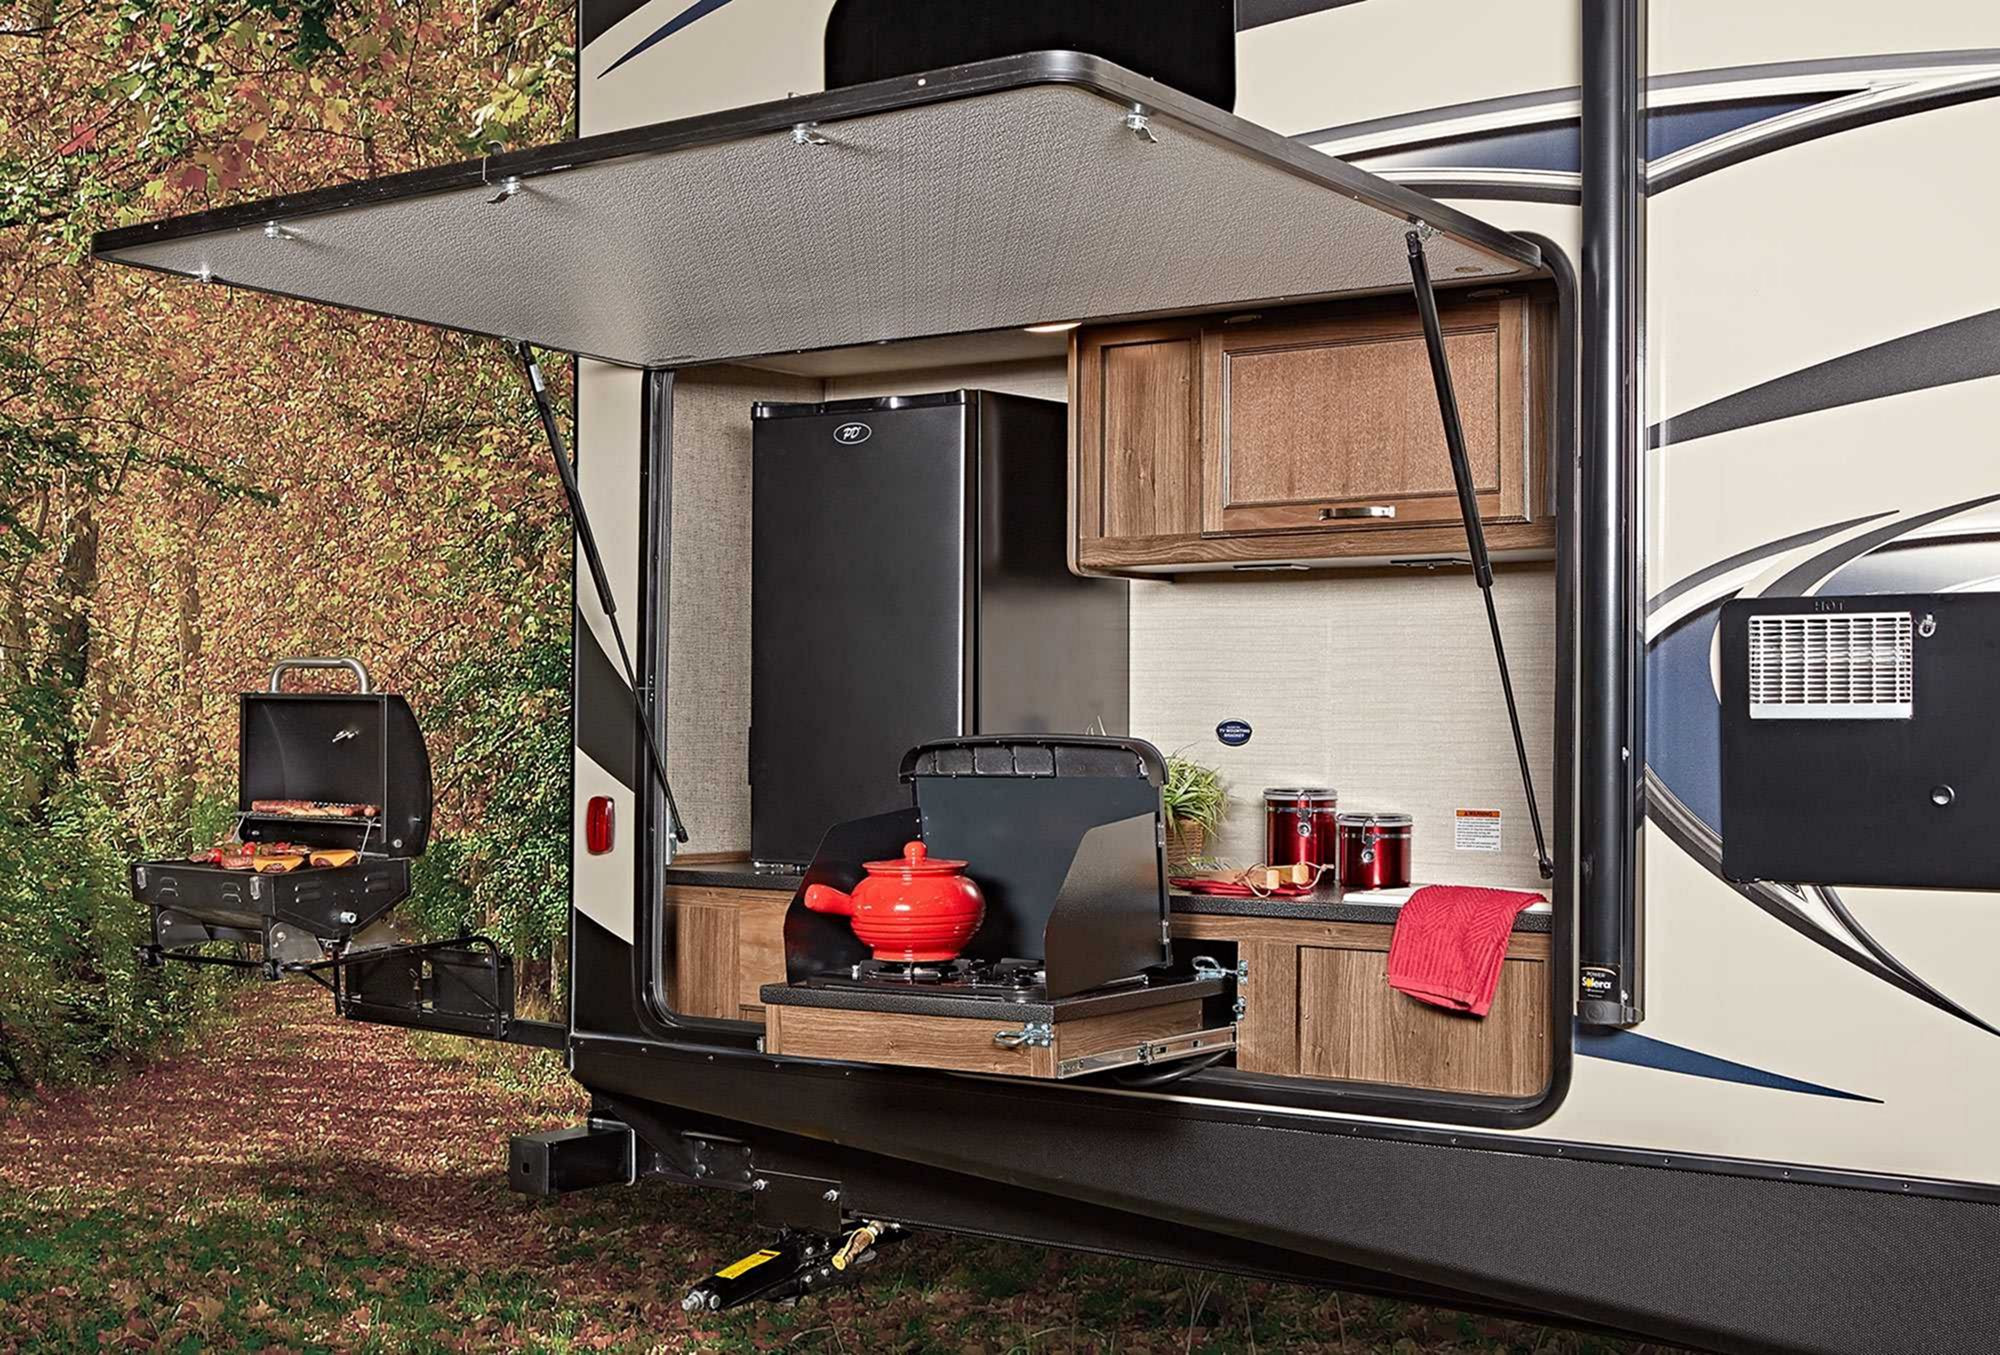 bunkhouse travel trailer with large outdoor kitchen